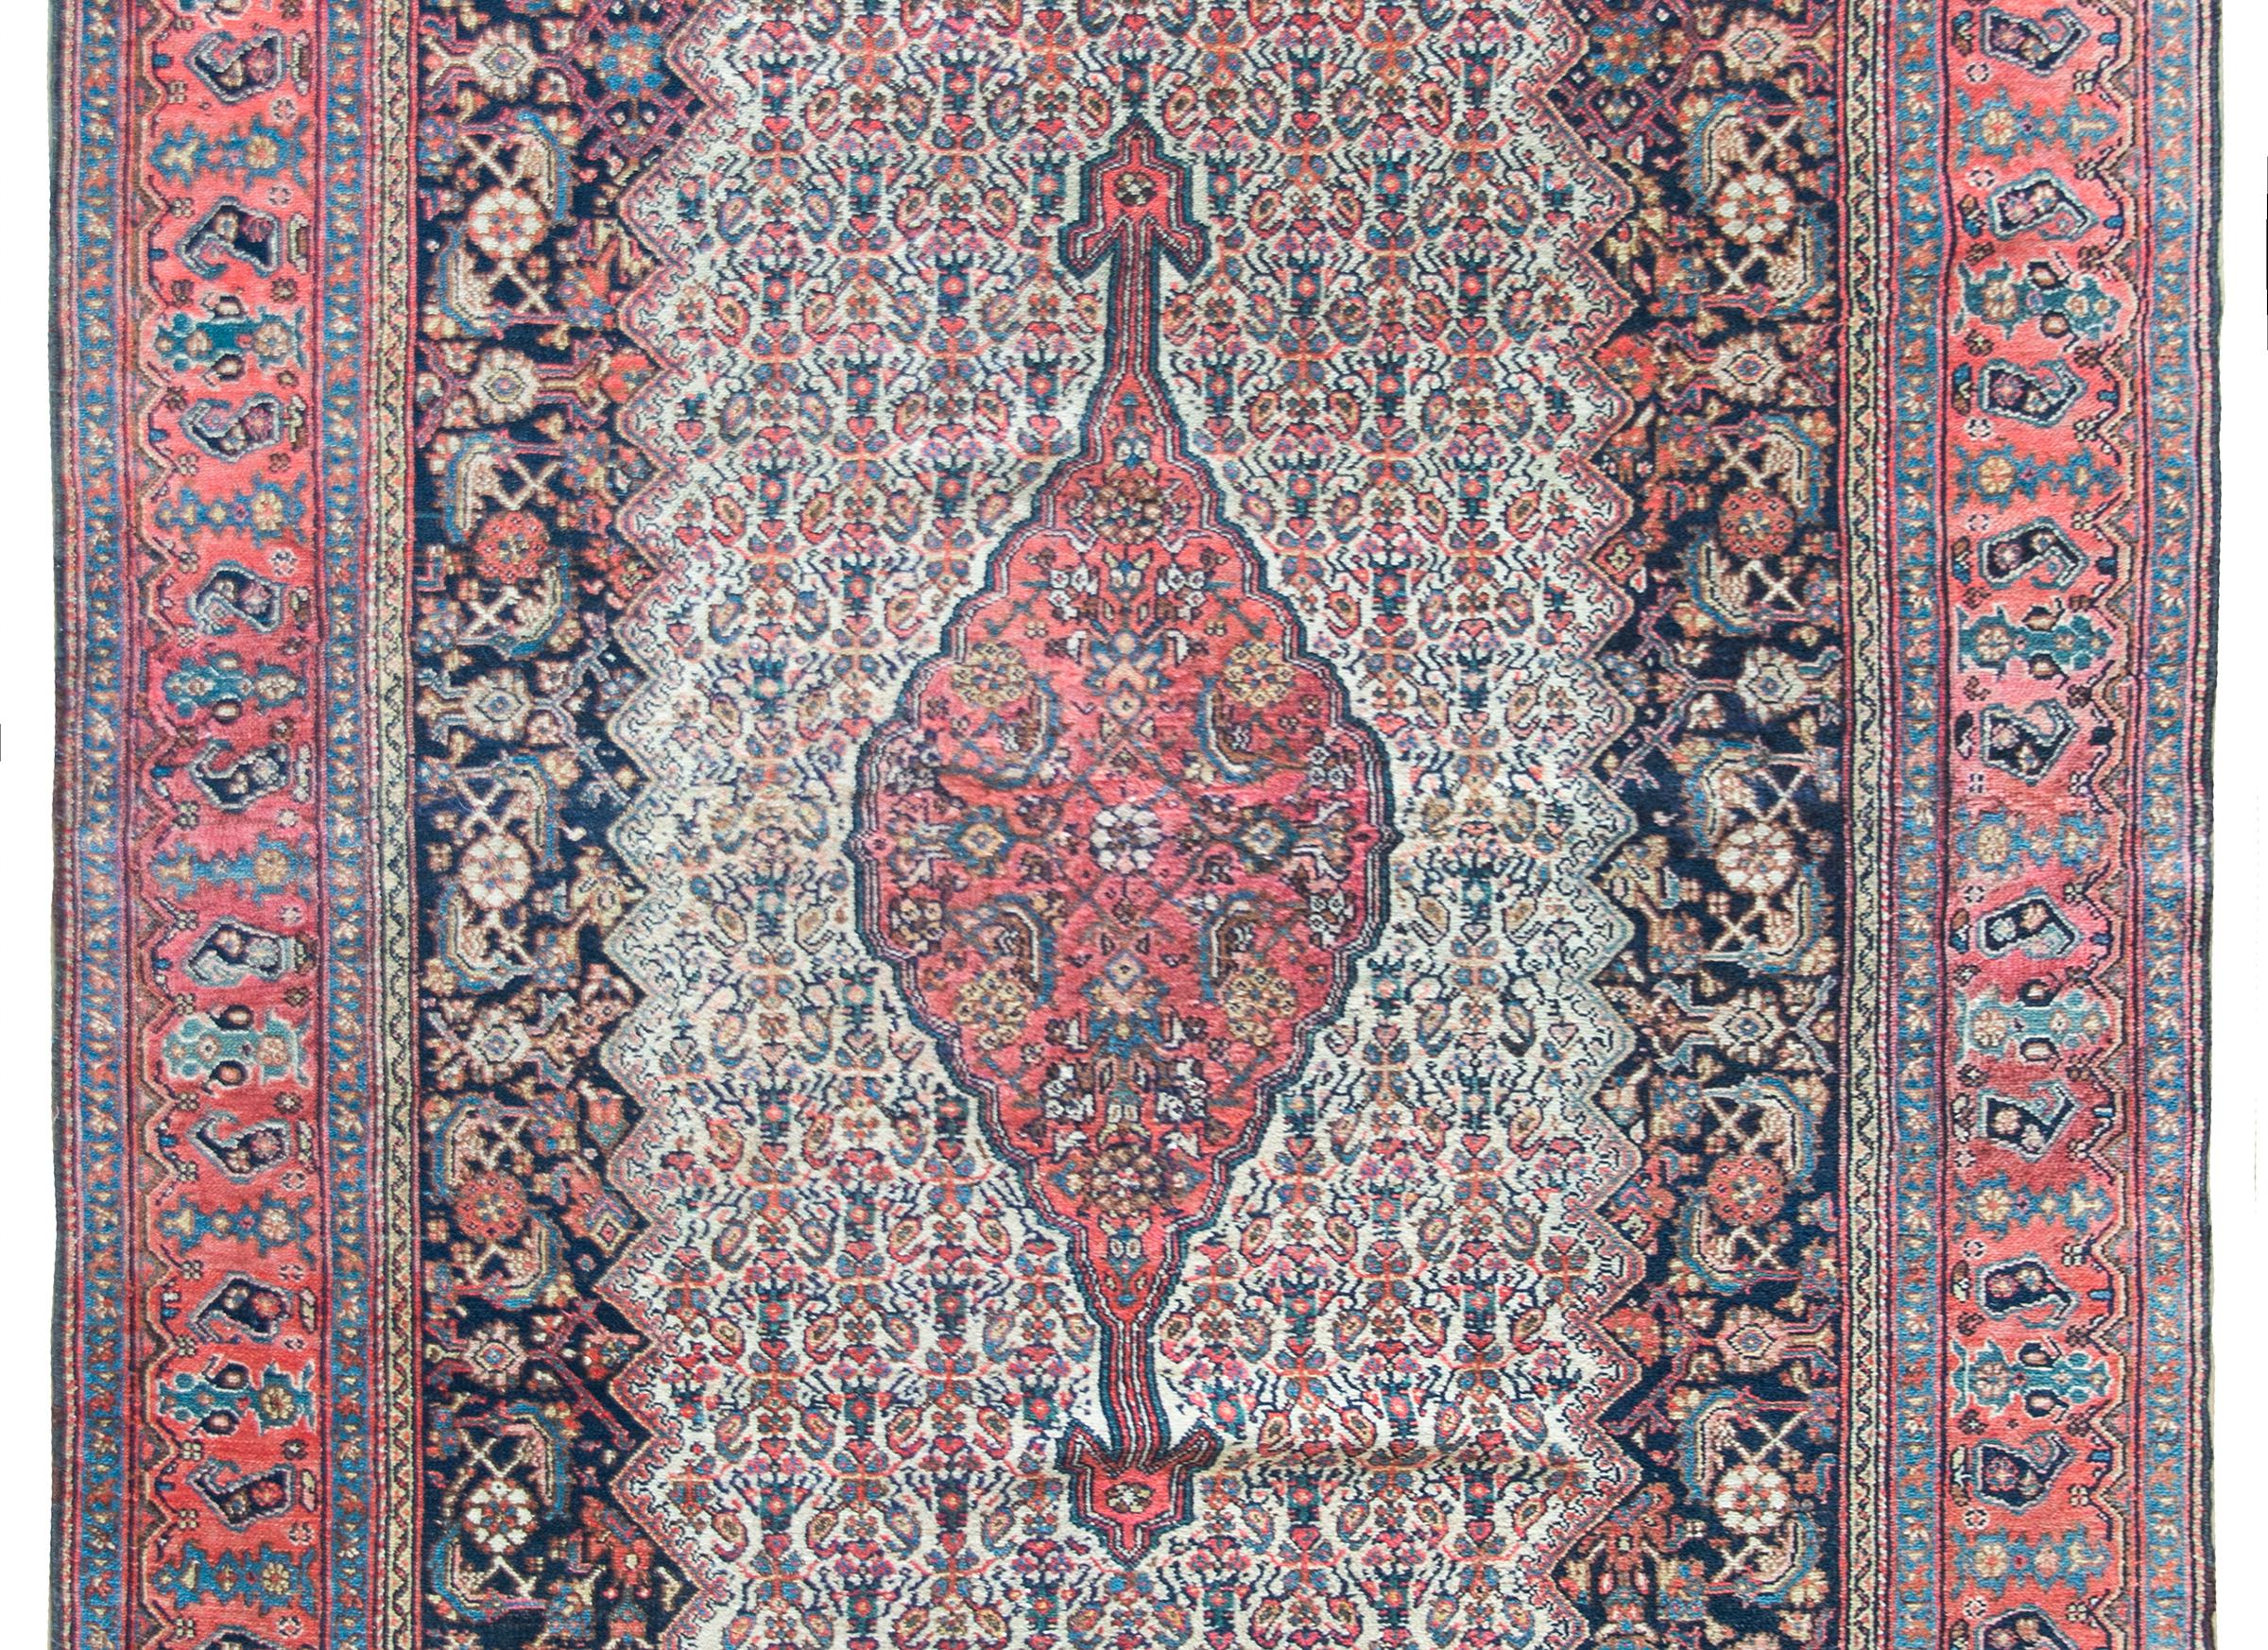 A beautiful early 20th century Persian Bibikibad rug with a large floral patterned medallion living amidst a field of more densely woven flowers, surrounded by a floral border, and all surrounded by a complex border with a wide central floral stripe